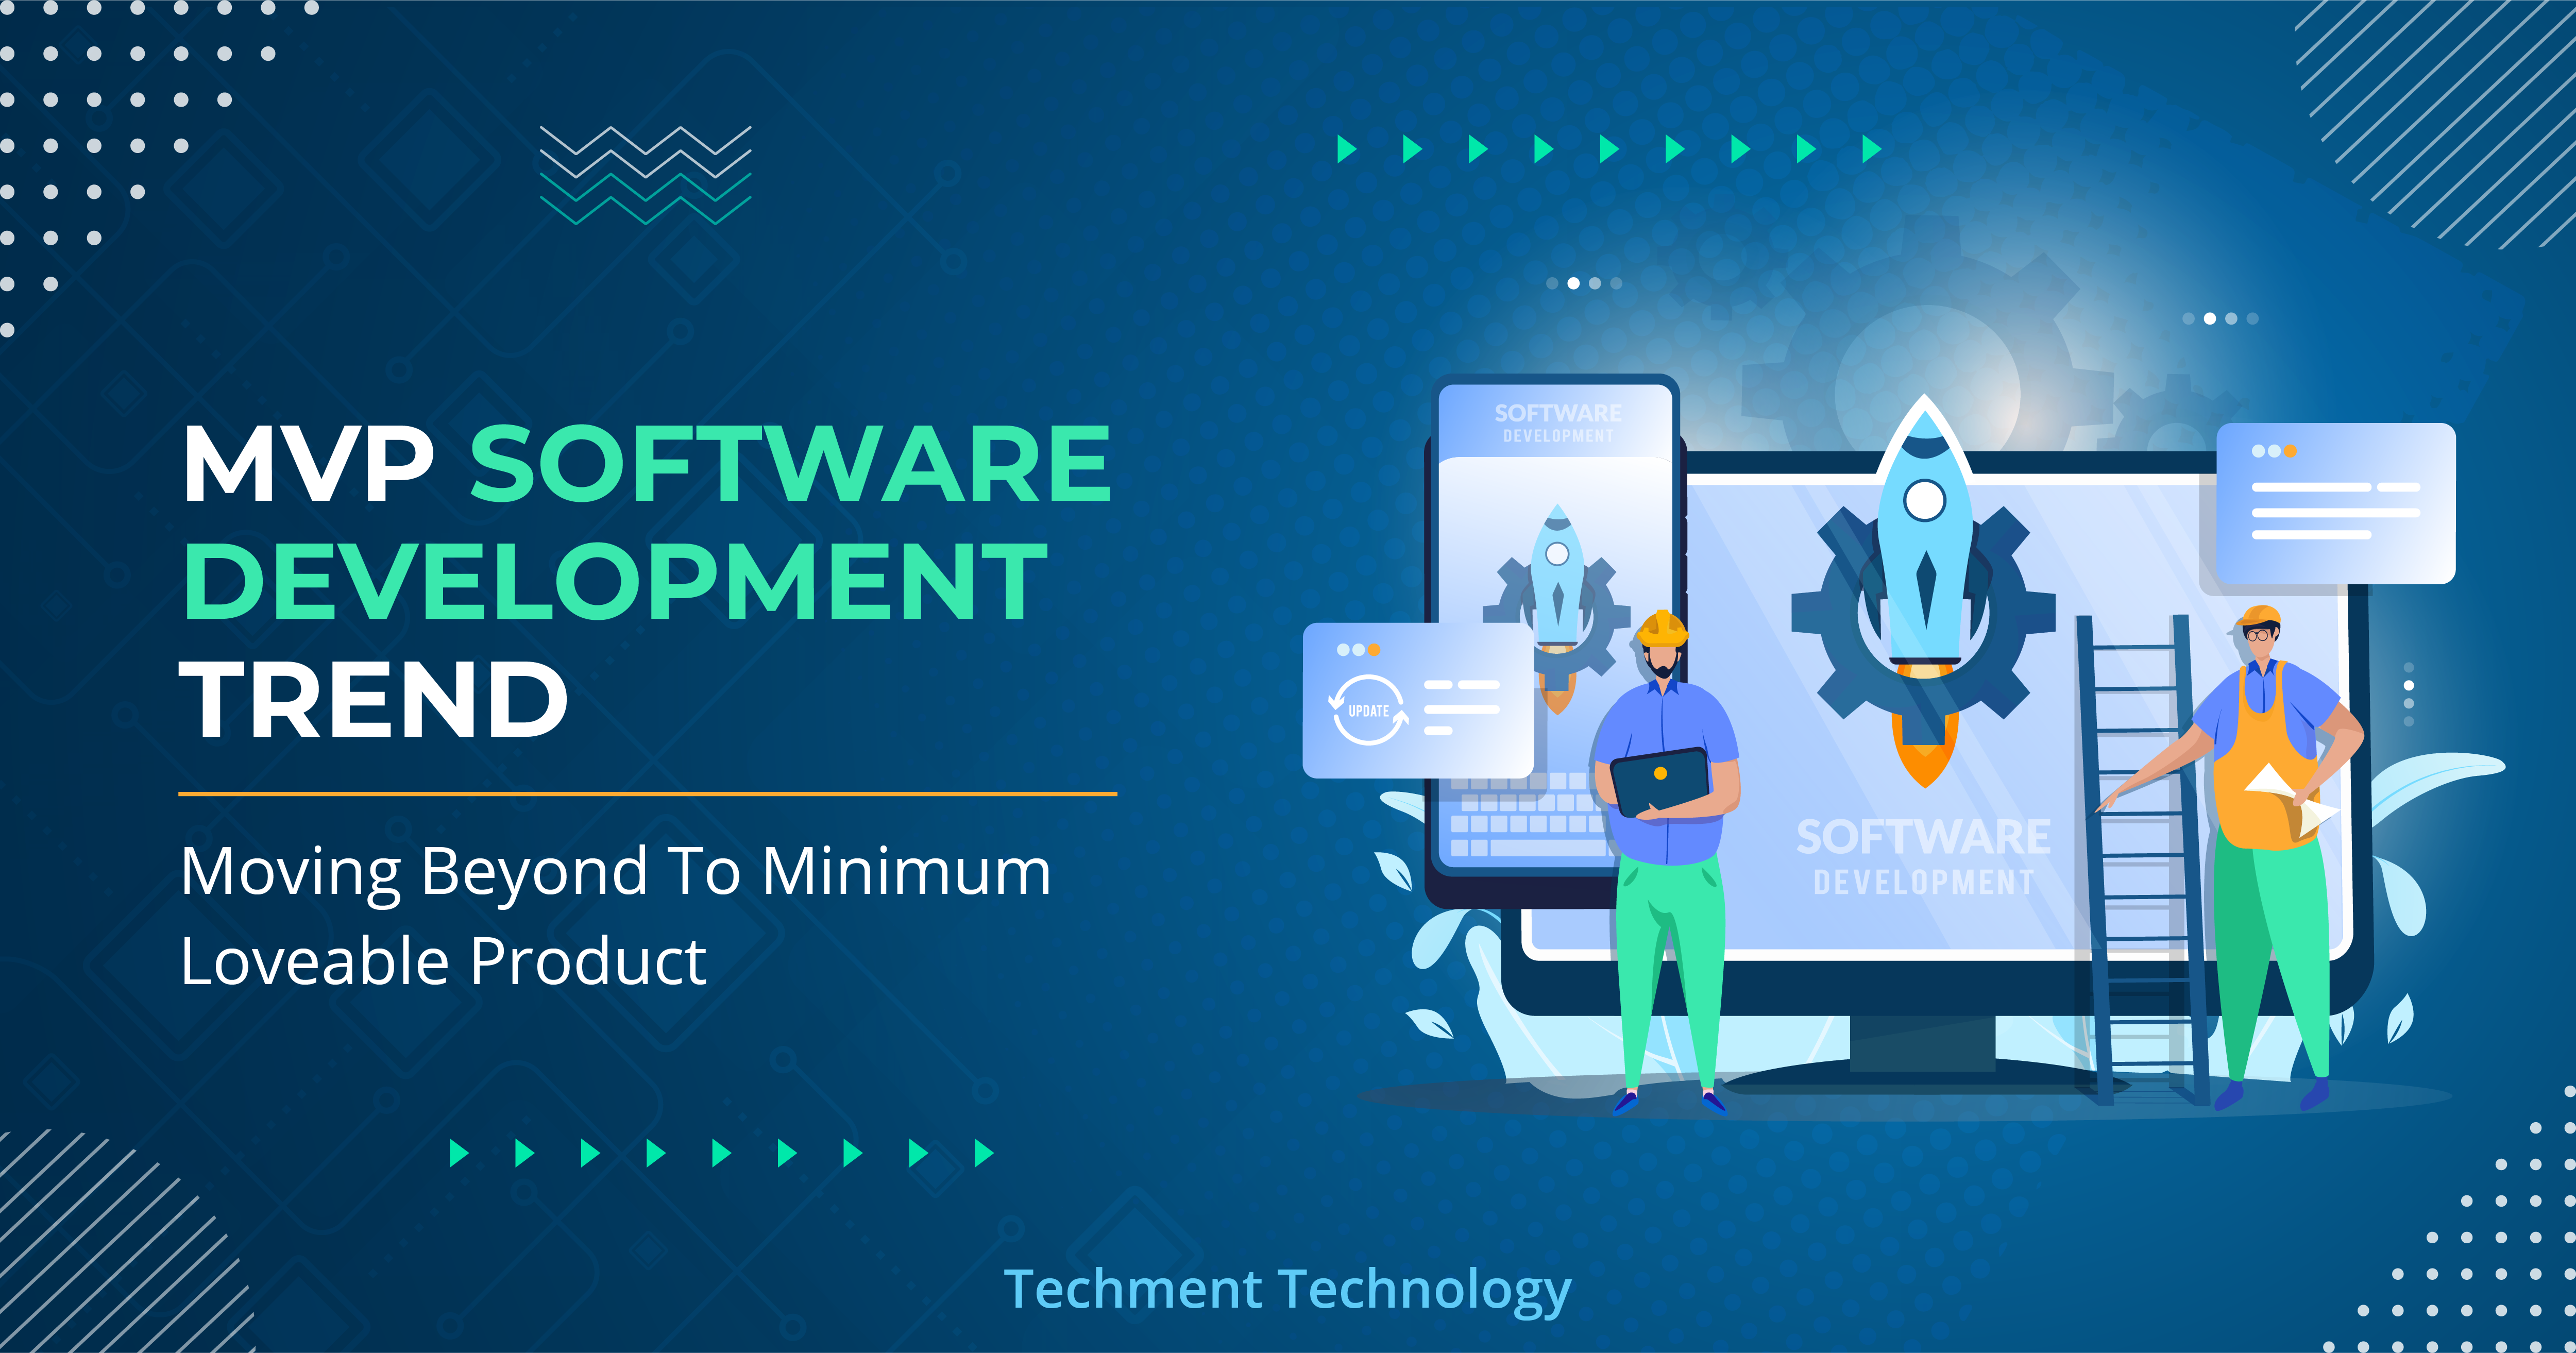 MVP Software Development Trend: Moving Beyond To Minimum Loveable Product